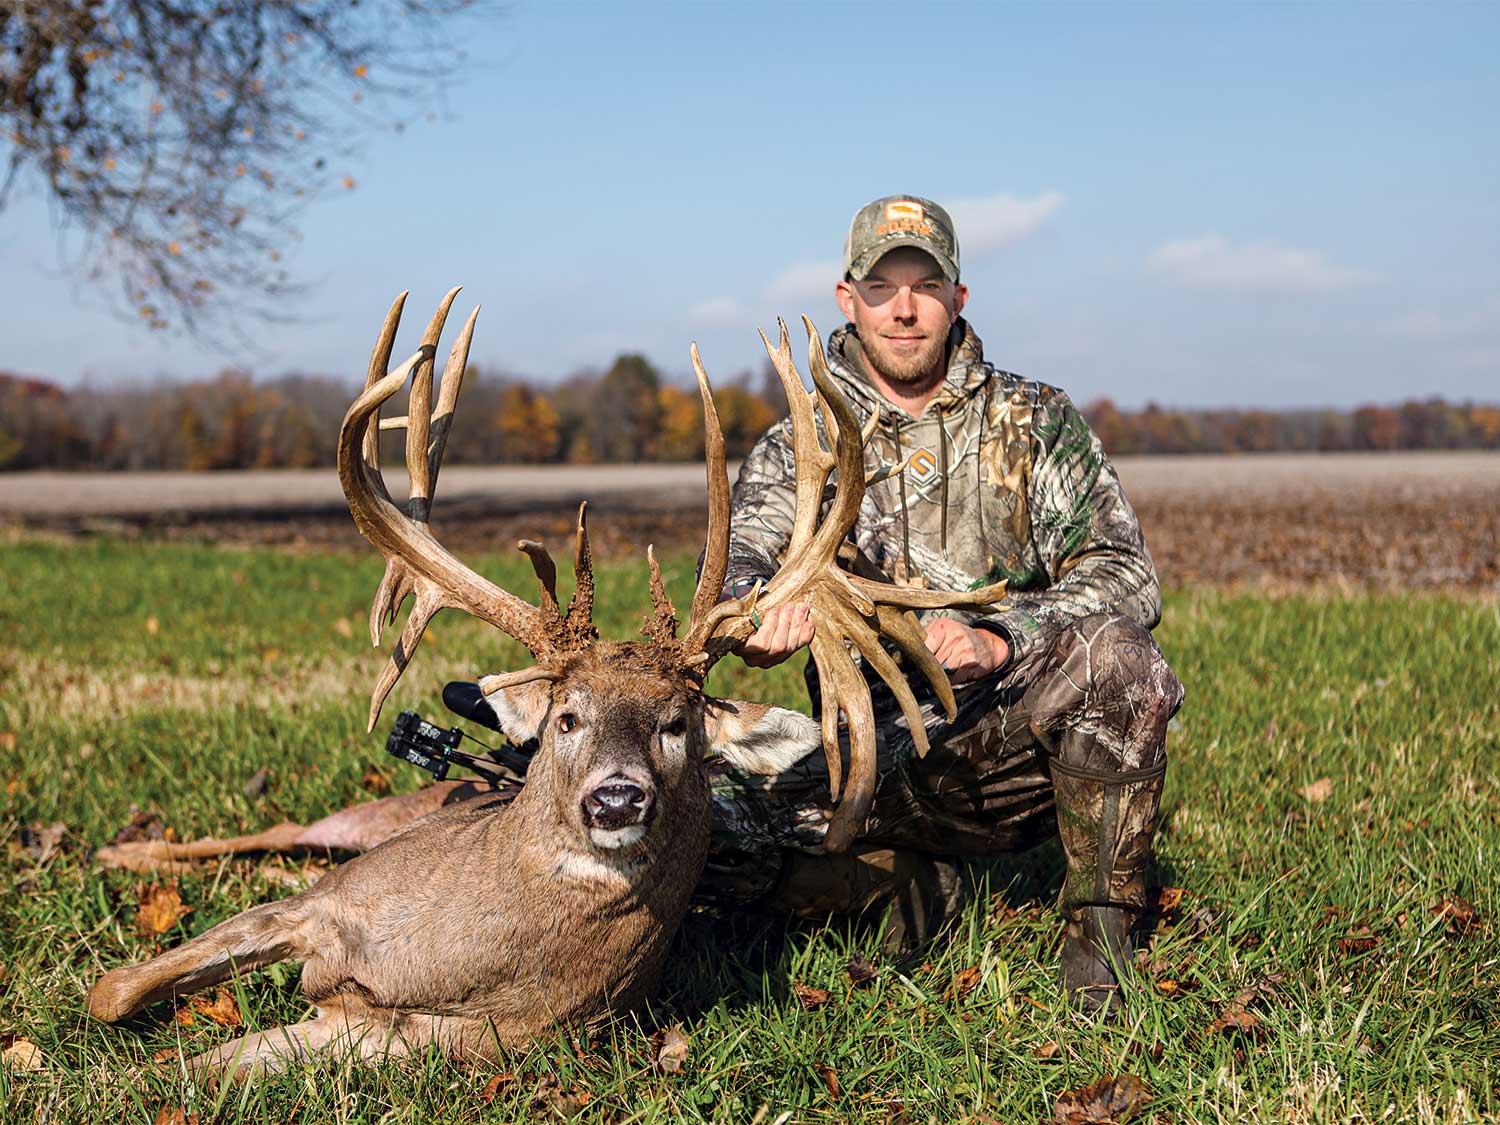 The world record whitetail buck from Illinois shows why it's one of the best deer hunting states